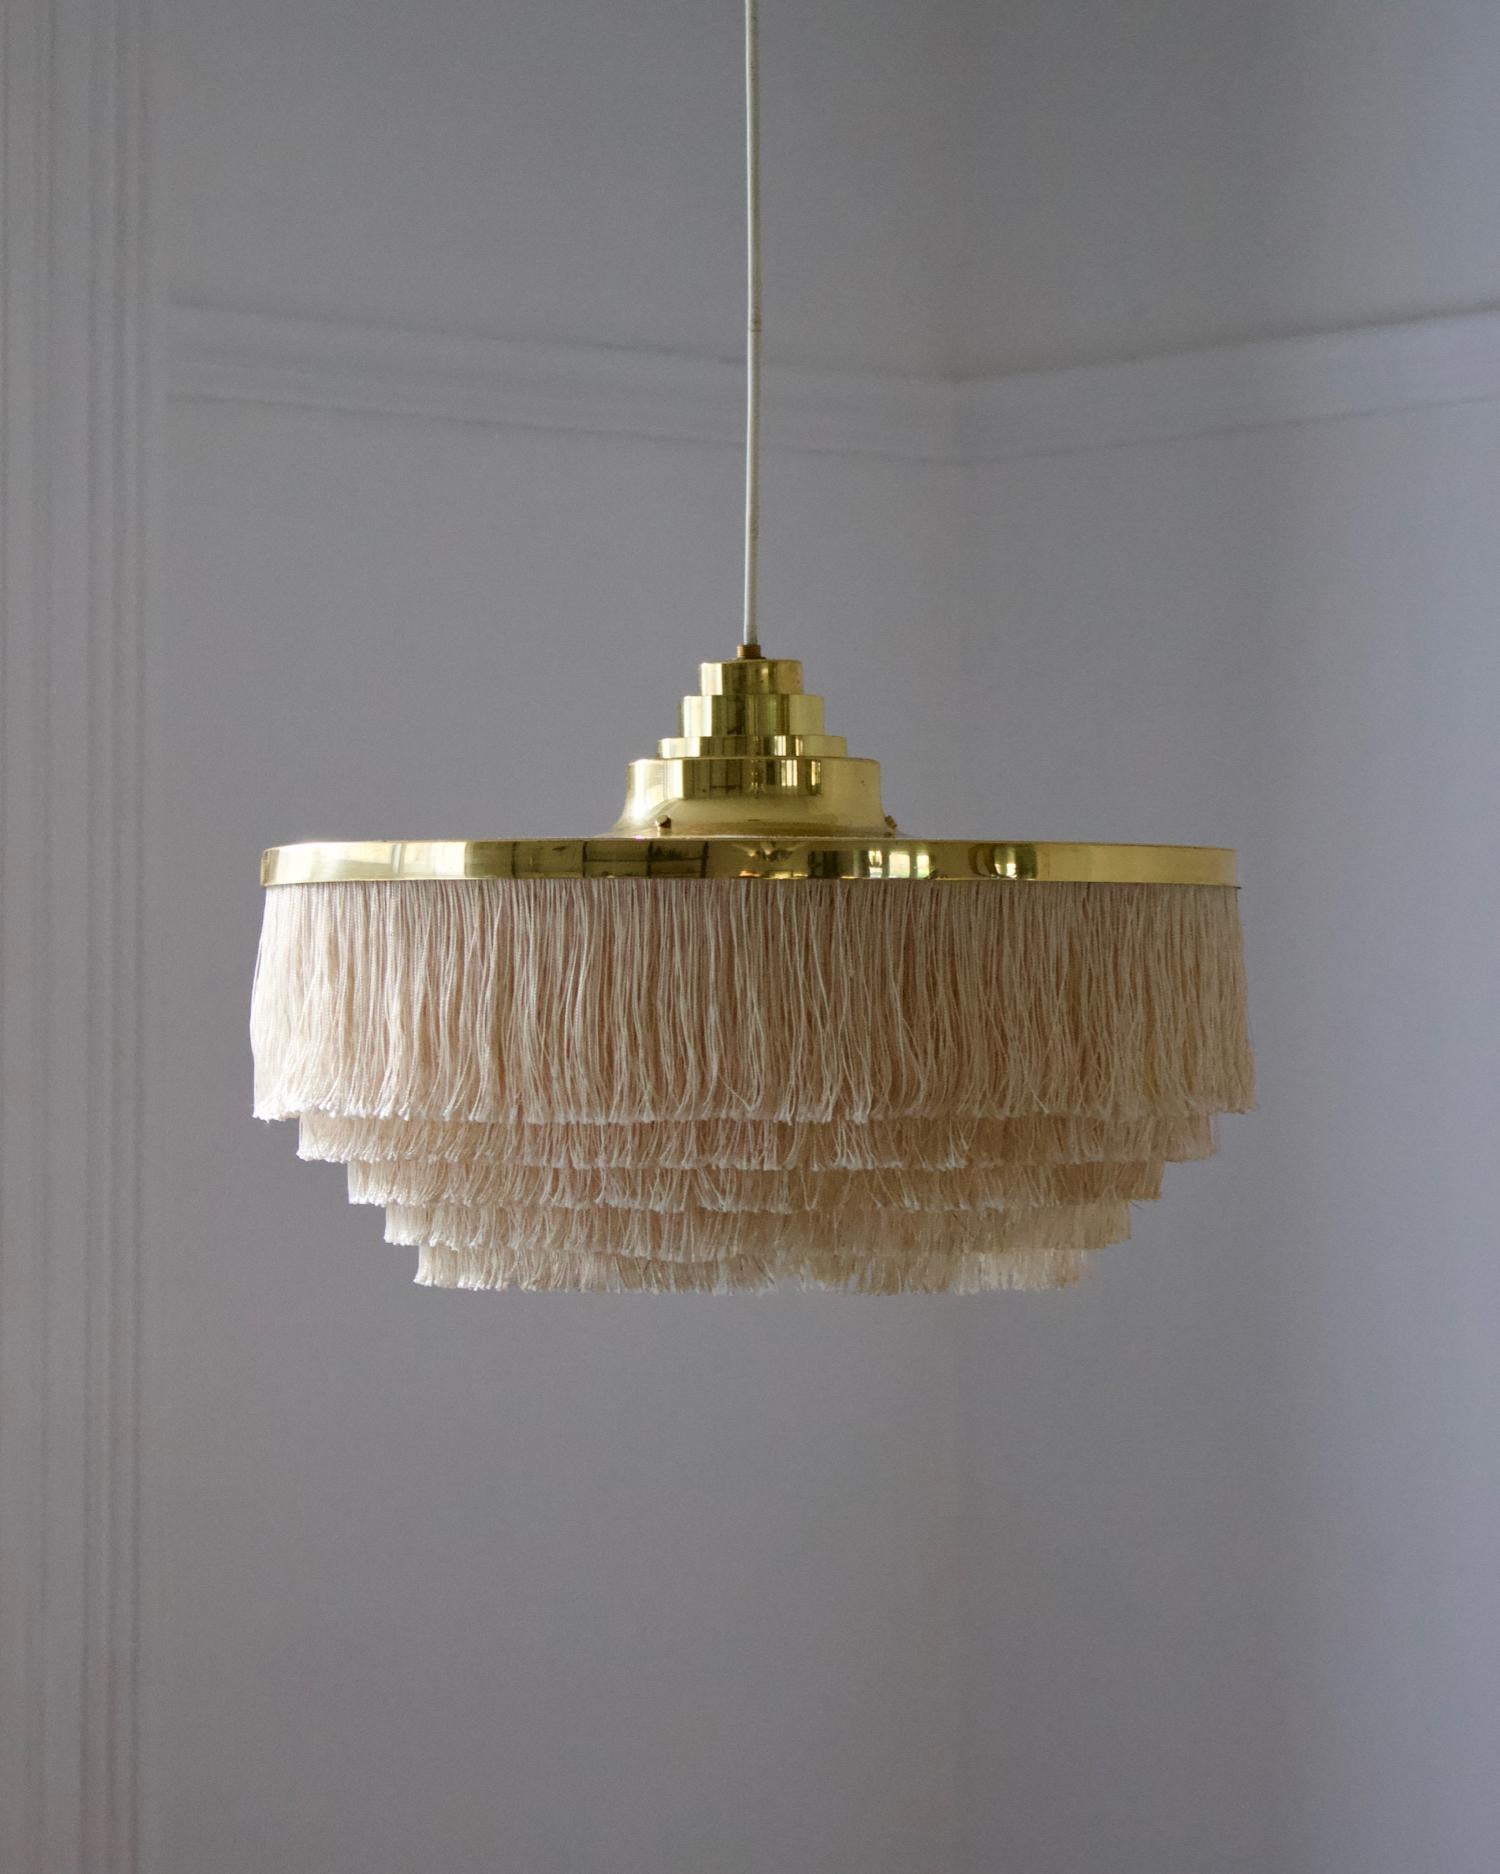 A fringed pendant light by the Swedish designer Hans-Agne Jakobsson for his own company in Markaryd, Sweden, mid-20th century. A very nice piece of Scandinavian modern design.

The fixture comprises a large brass shade with stepped detail, and